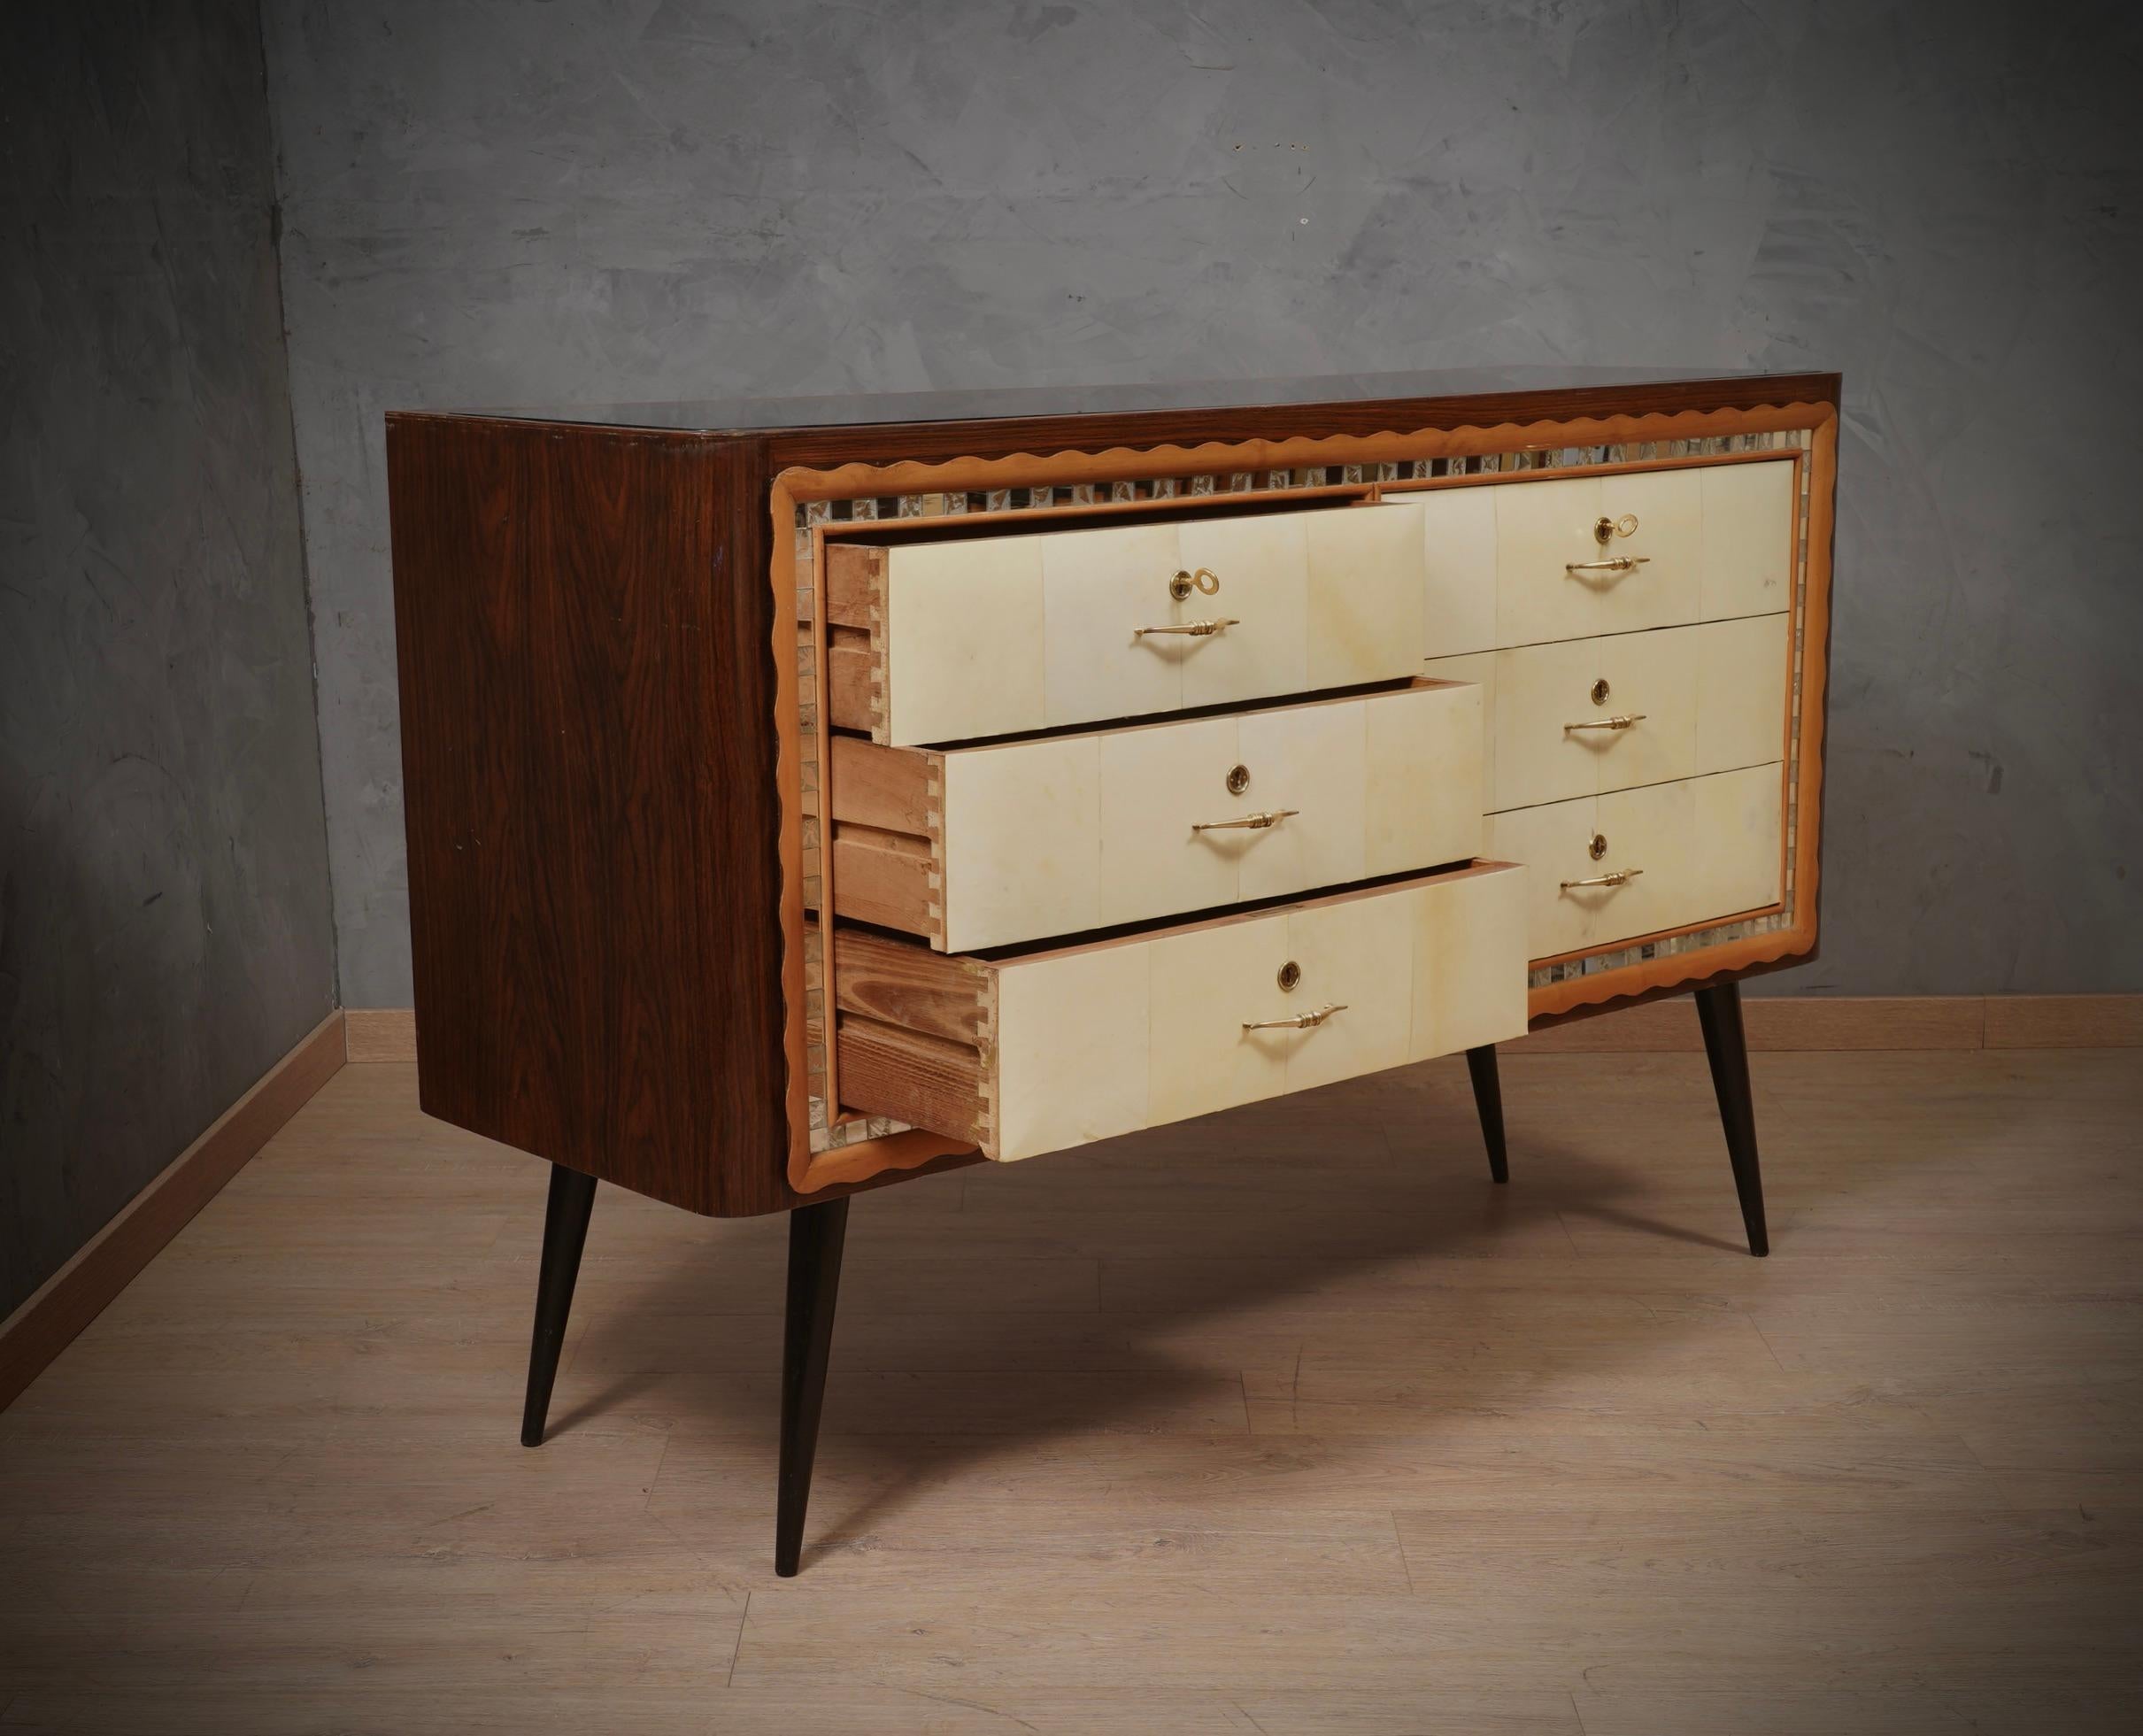 Italian Art Deco dresser from the first half of the last century. You can recognize his Italian style, Paolo Buffa, Vittorio Dassi, Osvaldo Borsani. Precious materials that were used to compose it, from goatskin, to walnut, to brass. Its shape is